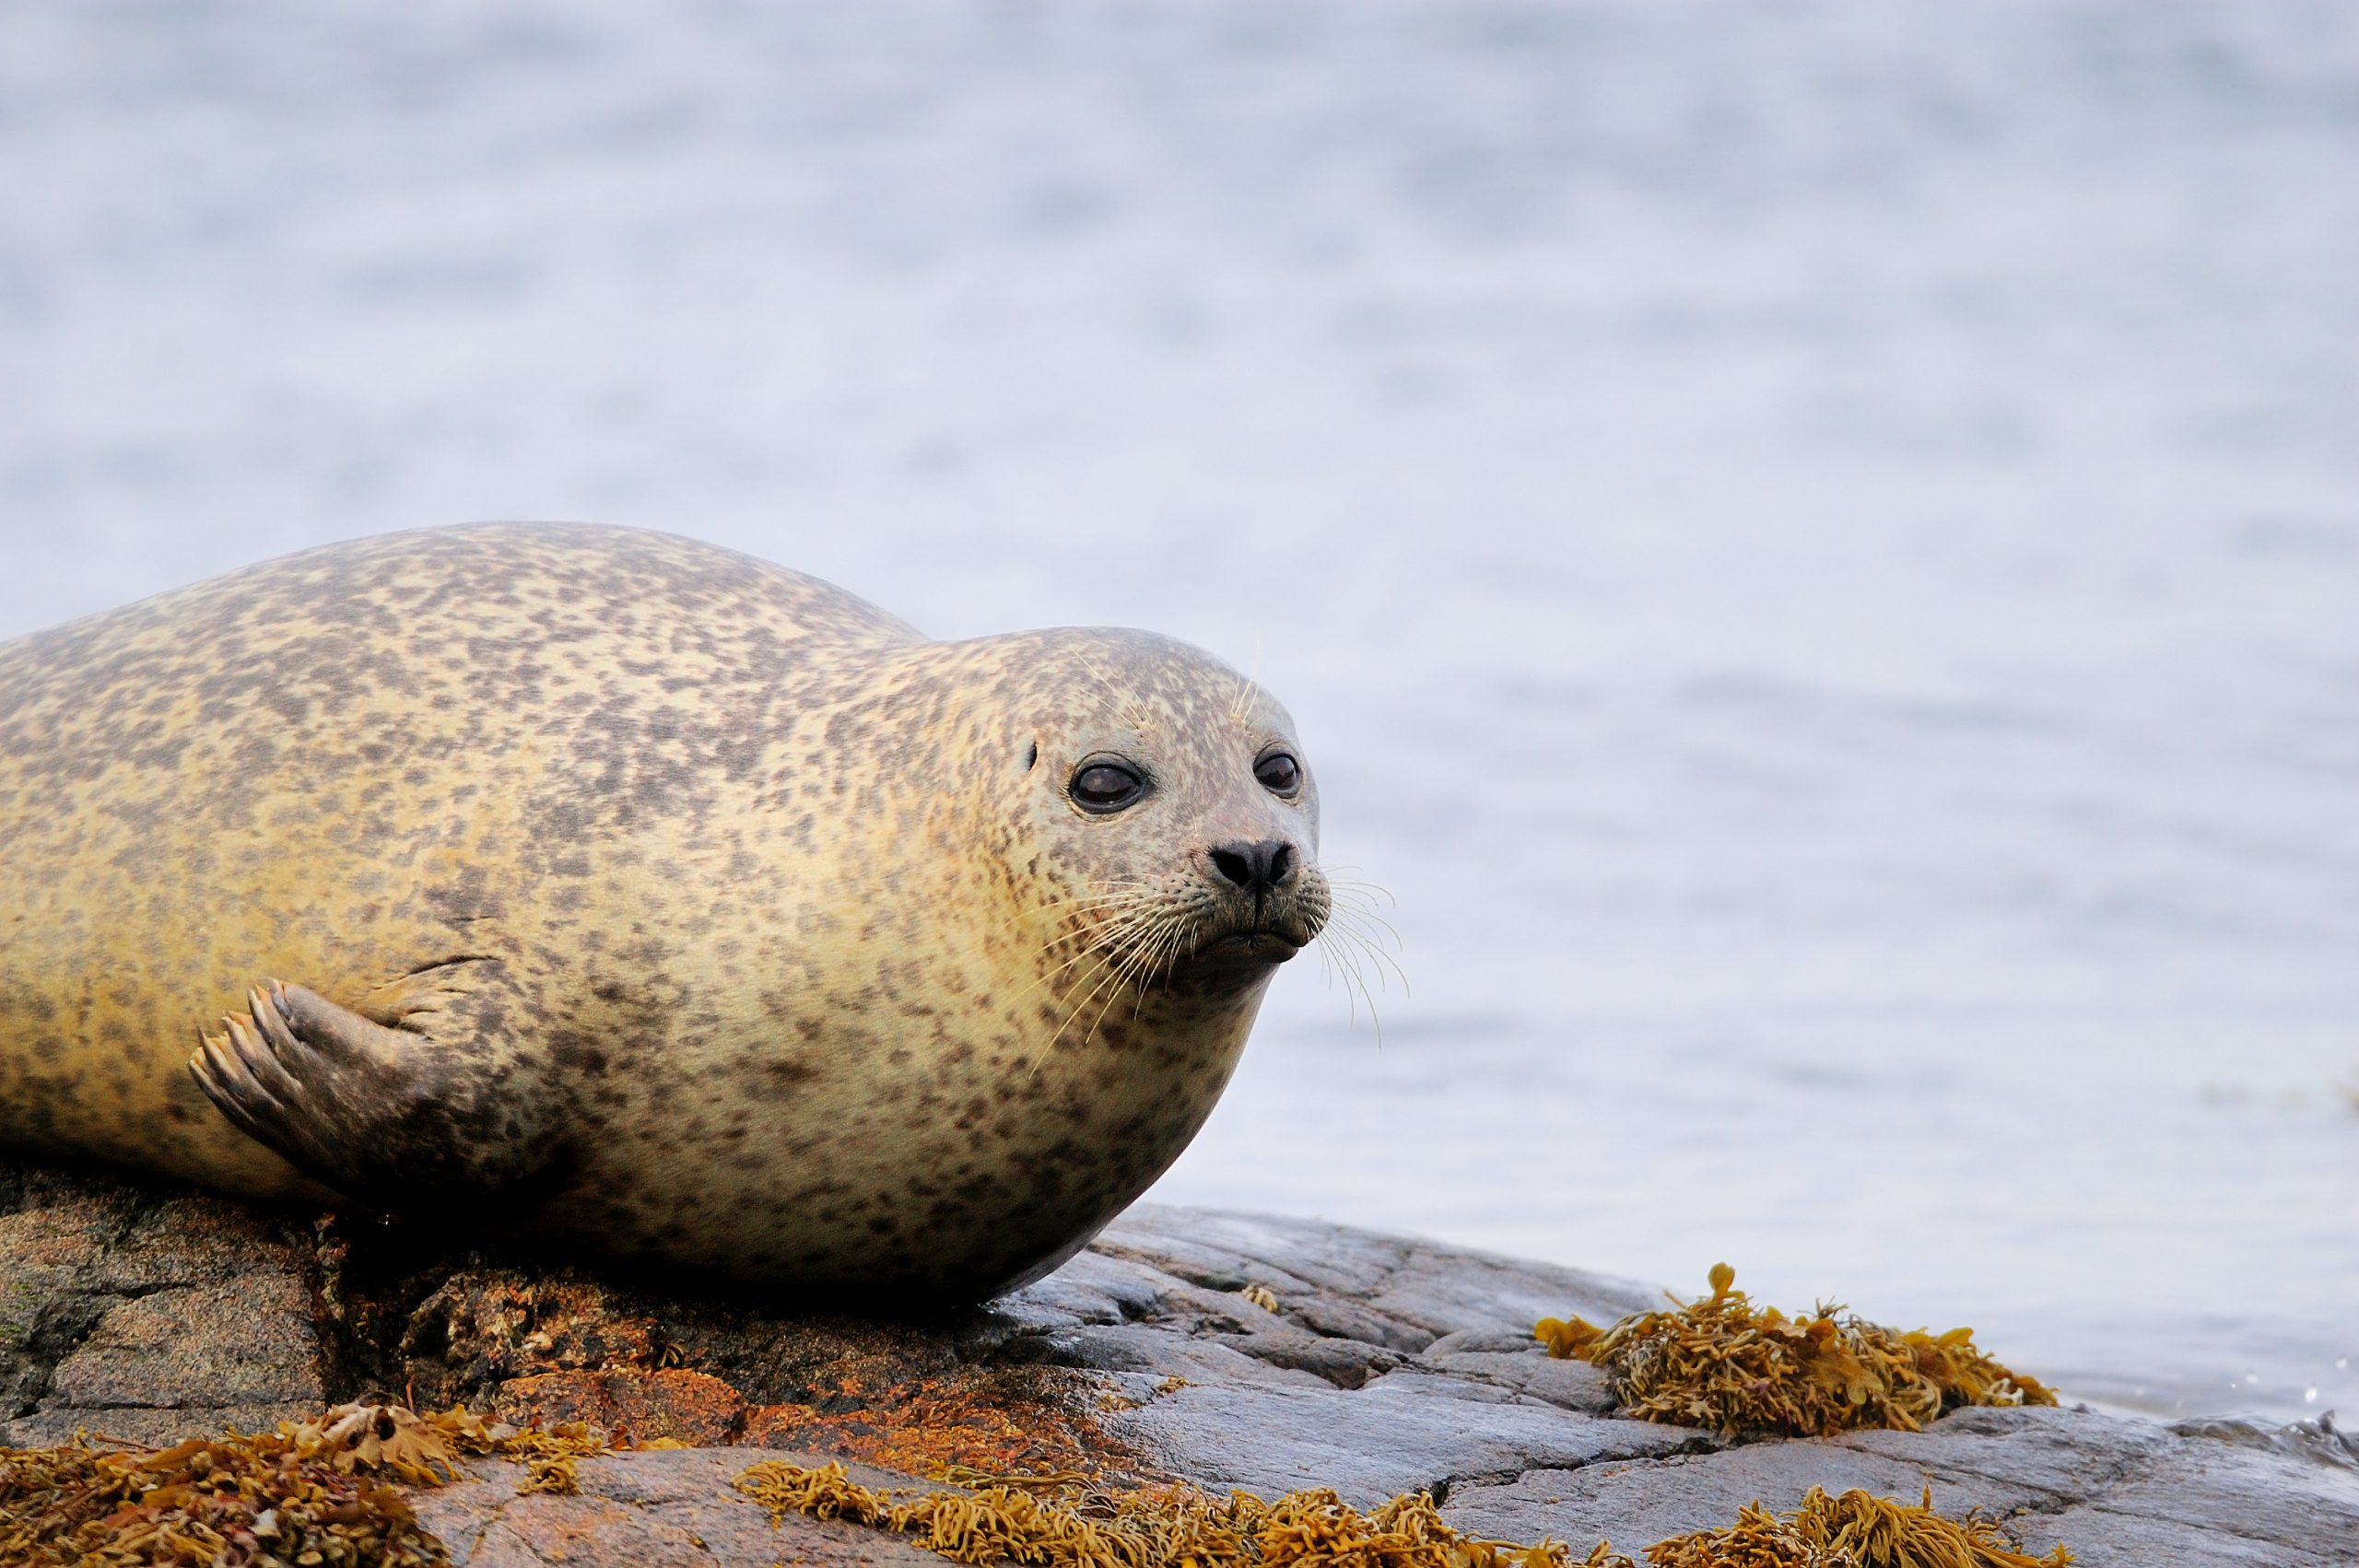 Seal pups at risk of separation from their mothers on public beaches.